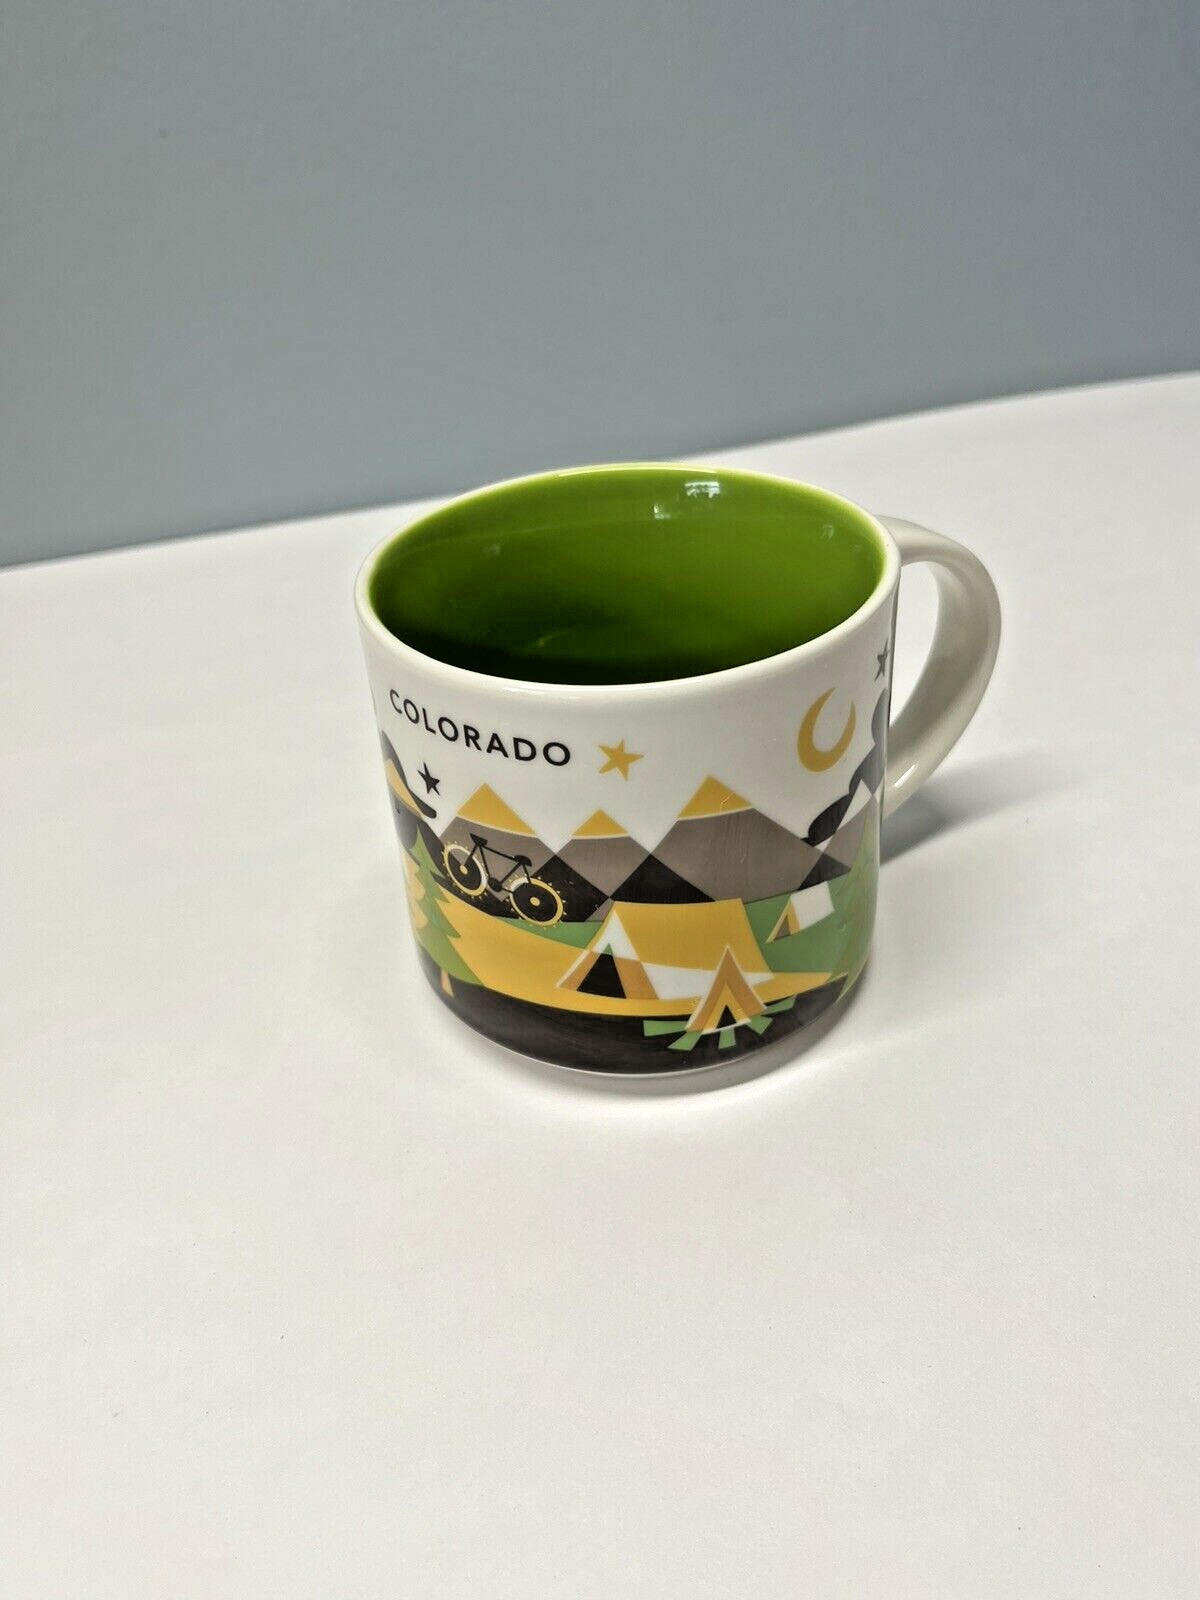 Starbucks Colorado Coffee Mug You Are Here Series Excellent condition